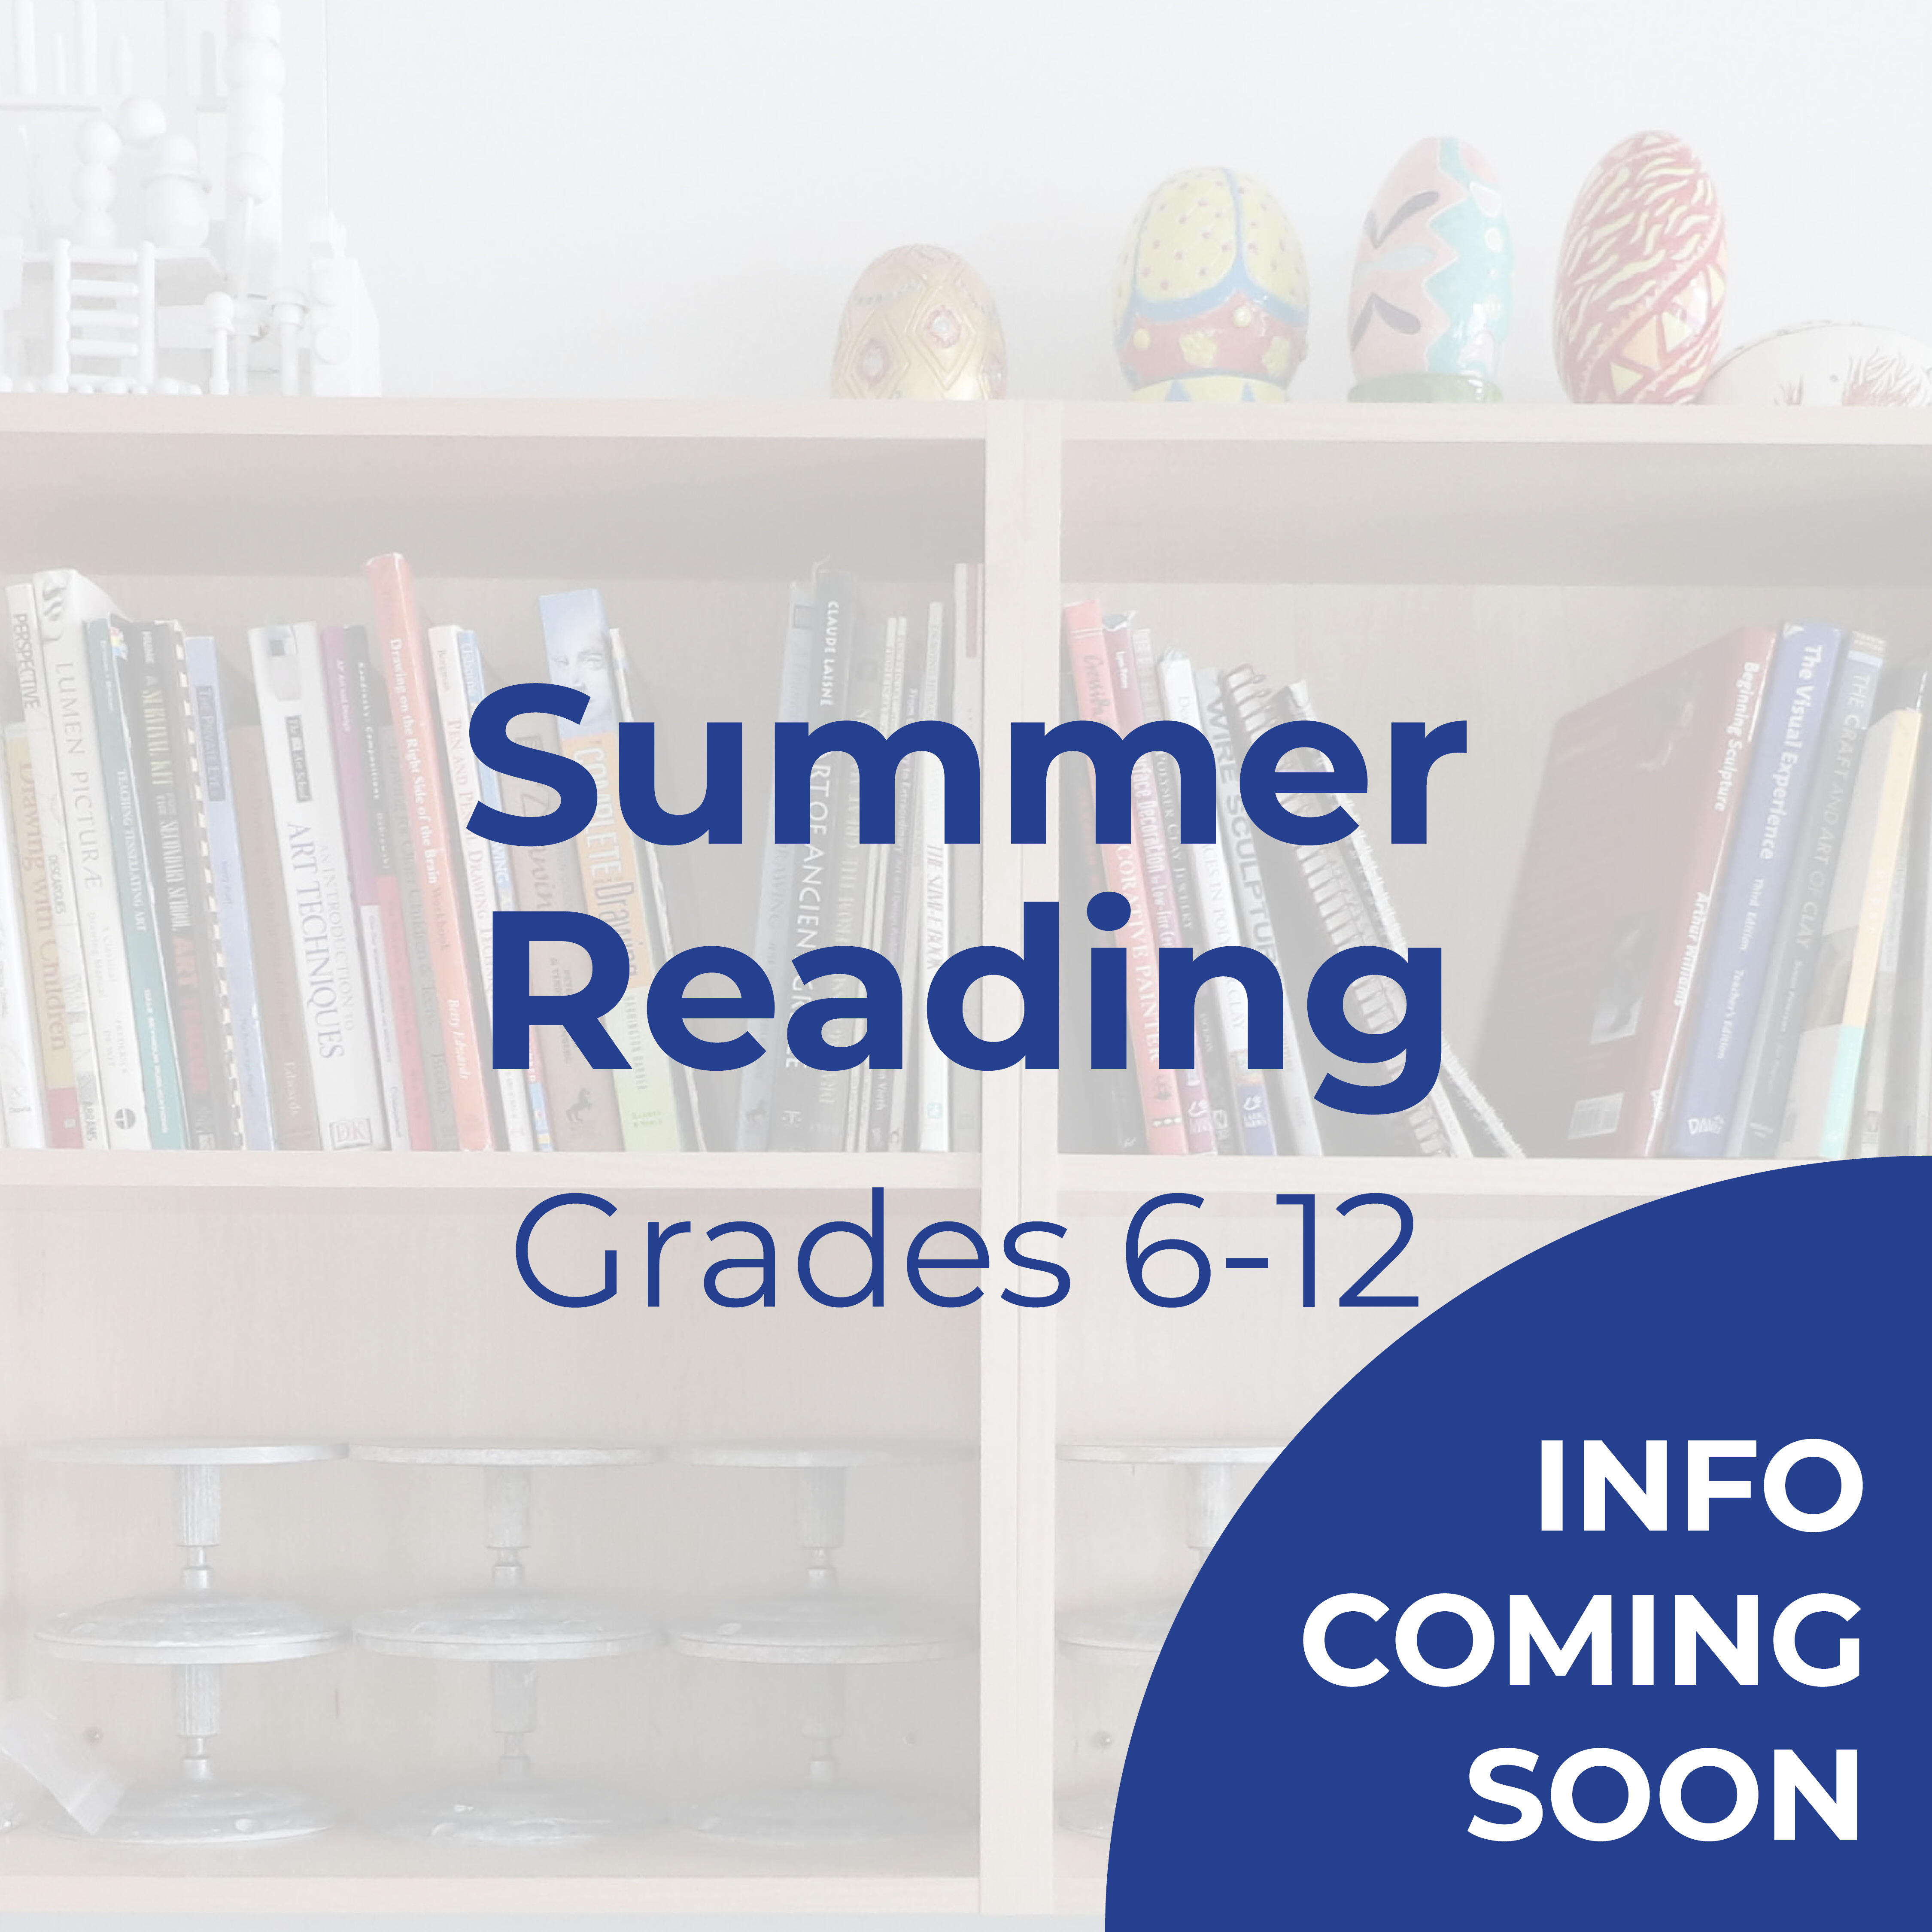 Text that reads "Summer Reading: Grades K-12" 